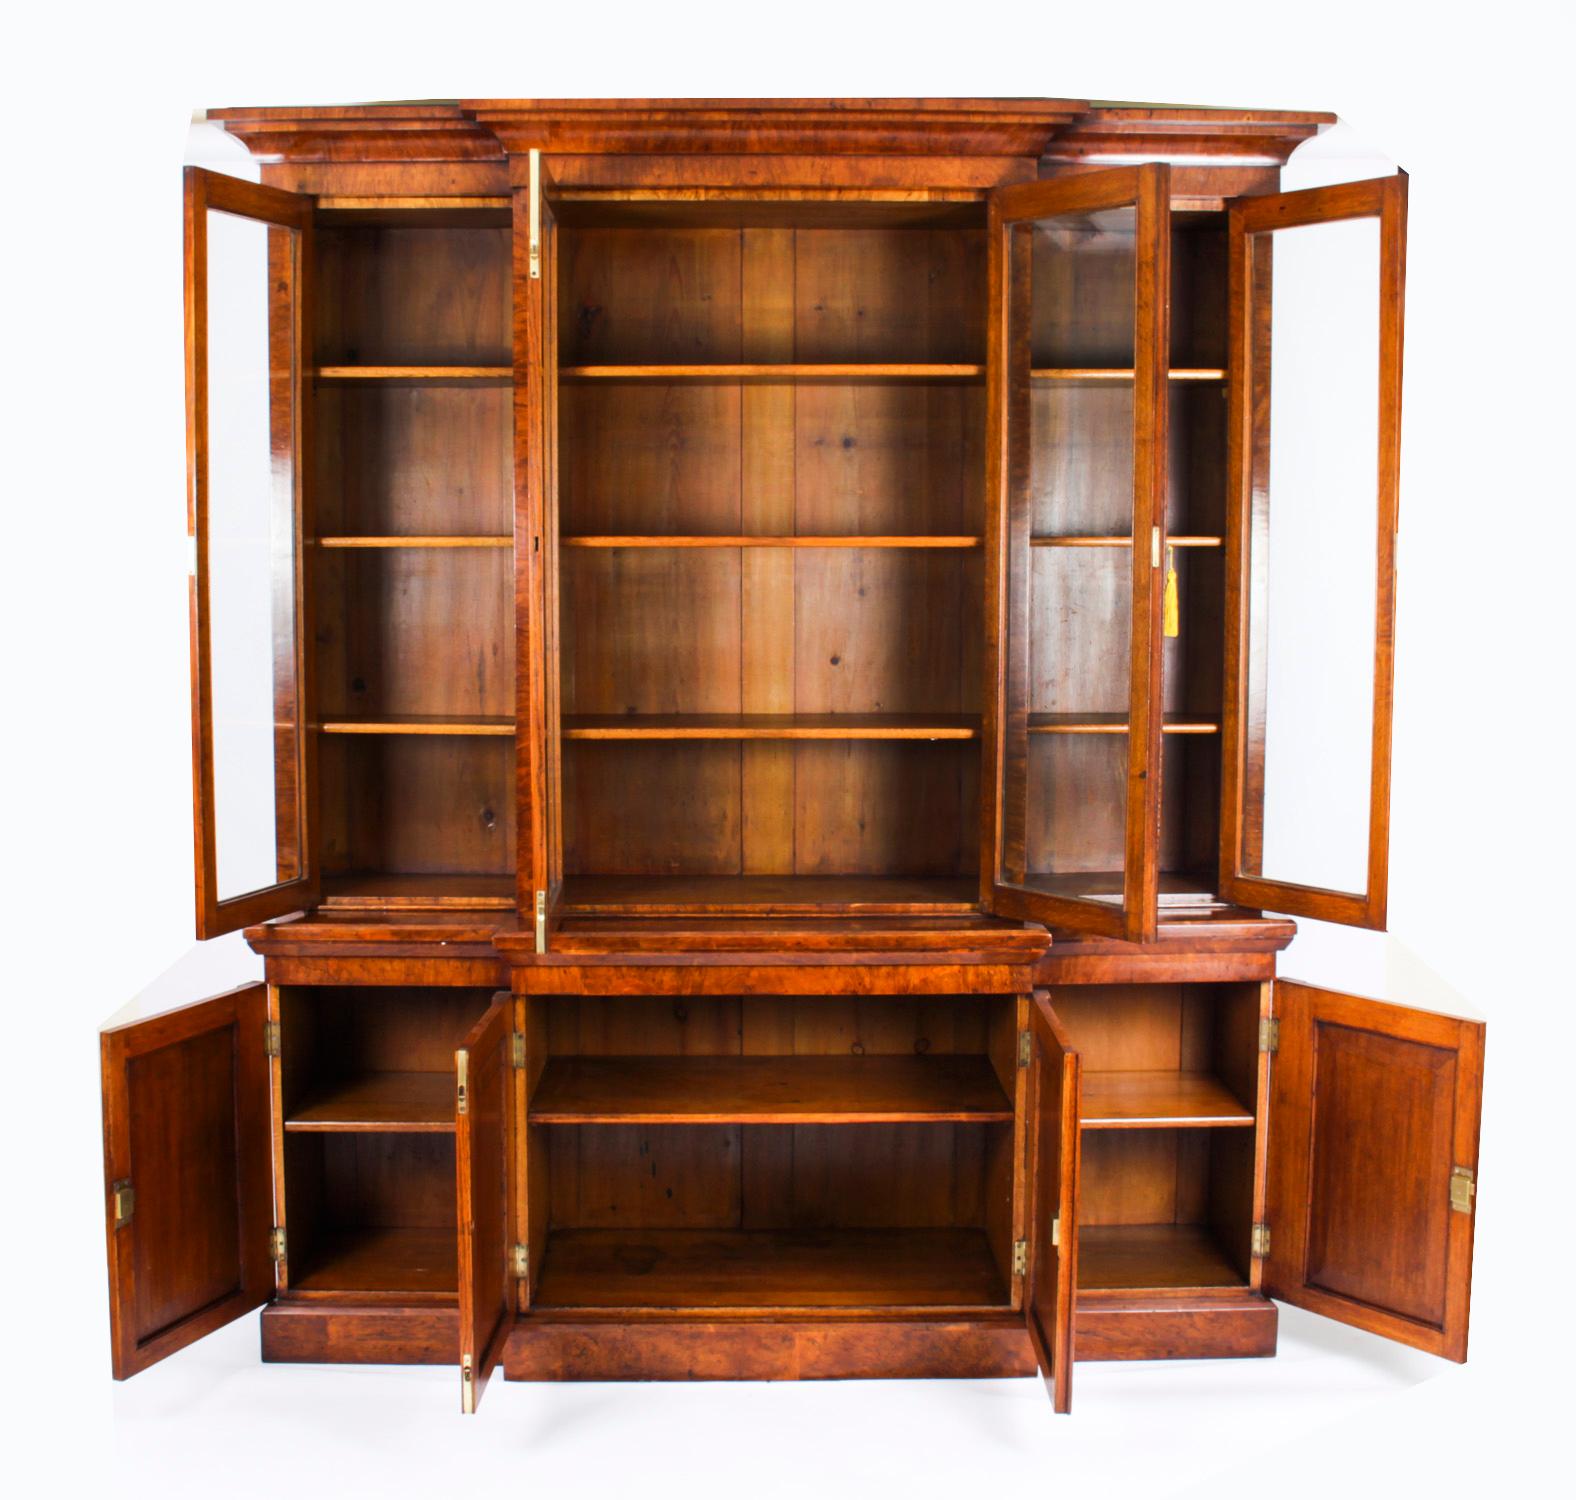 Antique English Pollard Oak Library Breakfront Bookcase Early 19th C 3